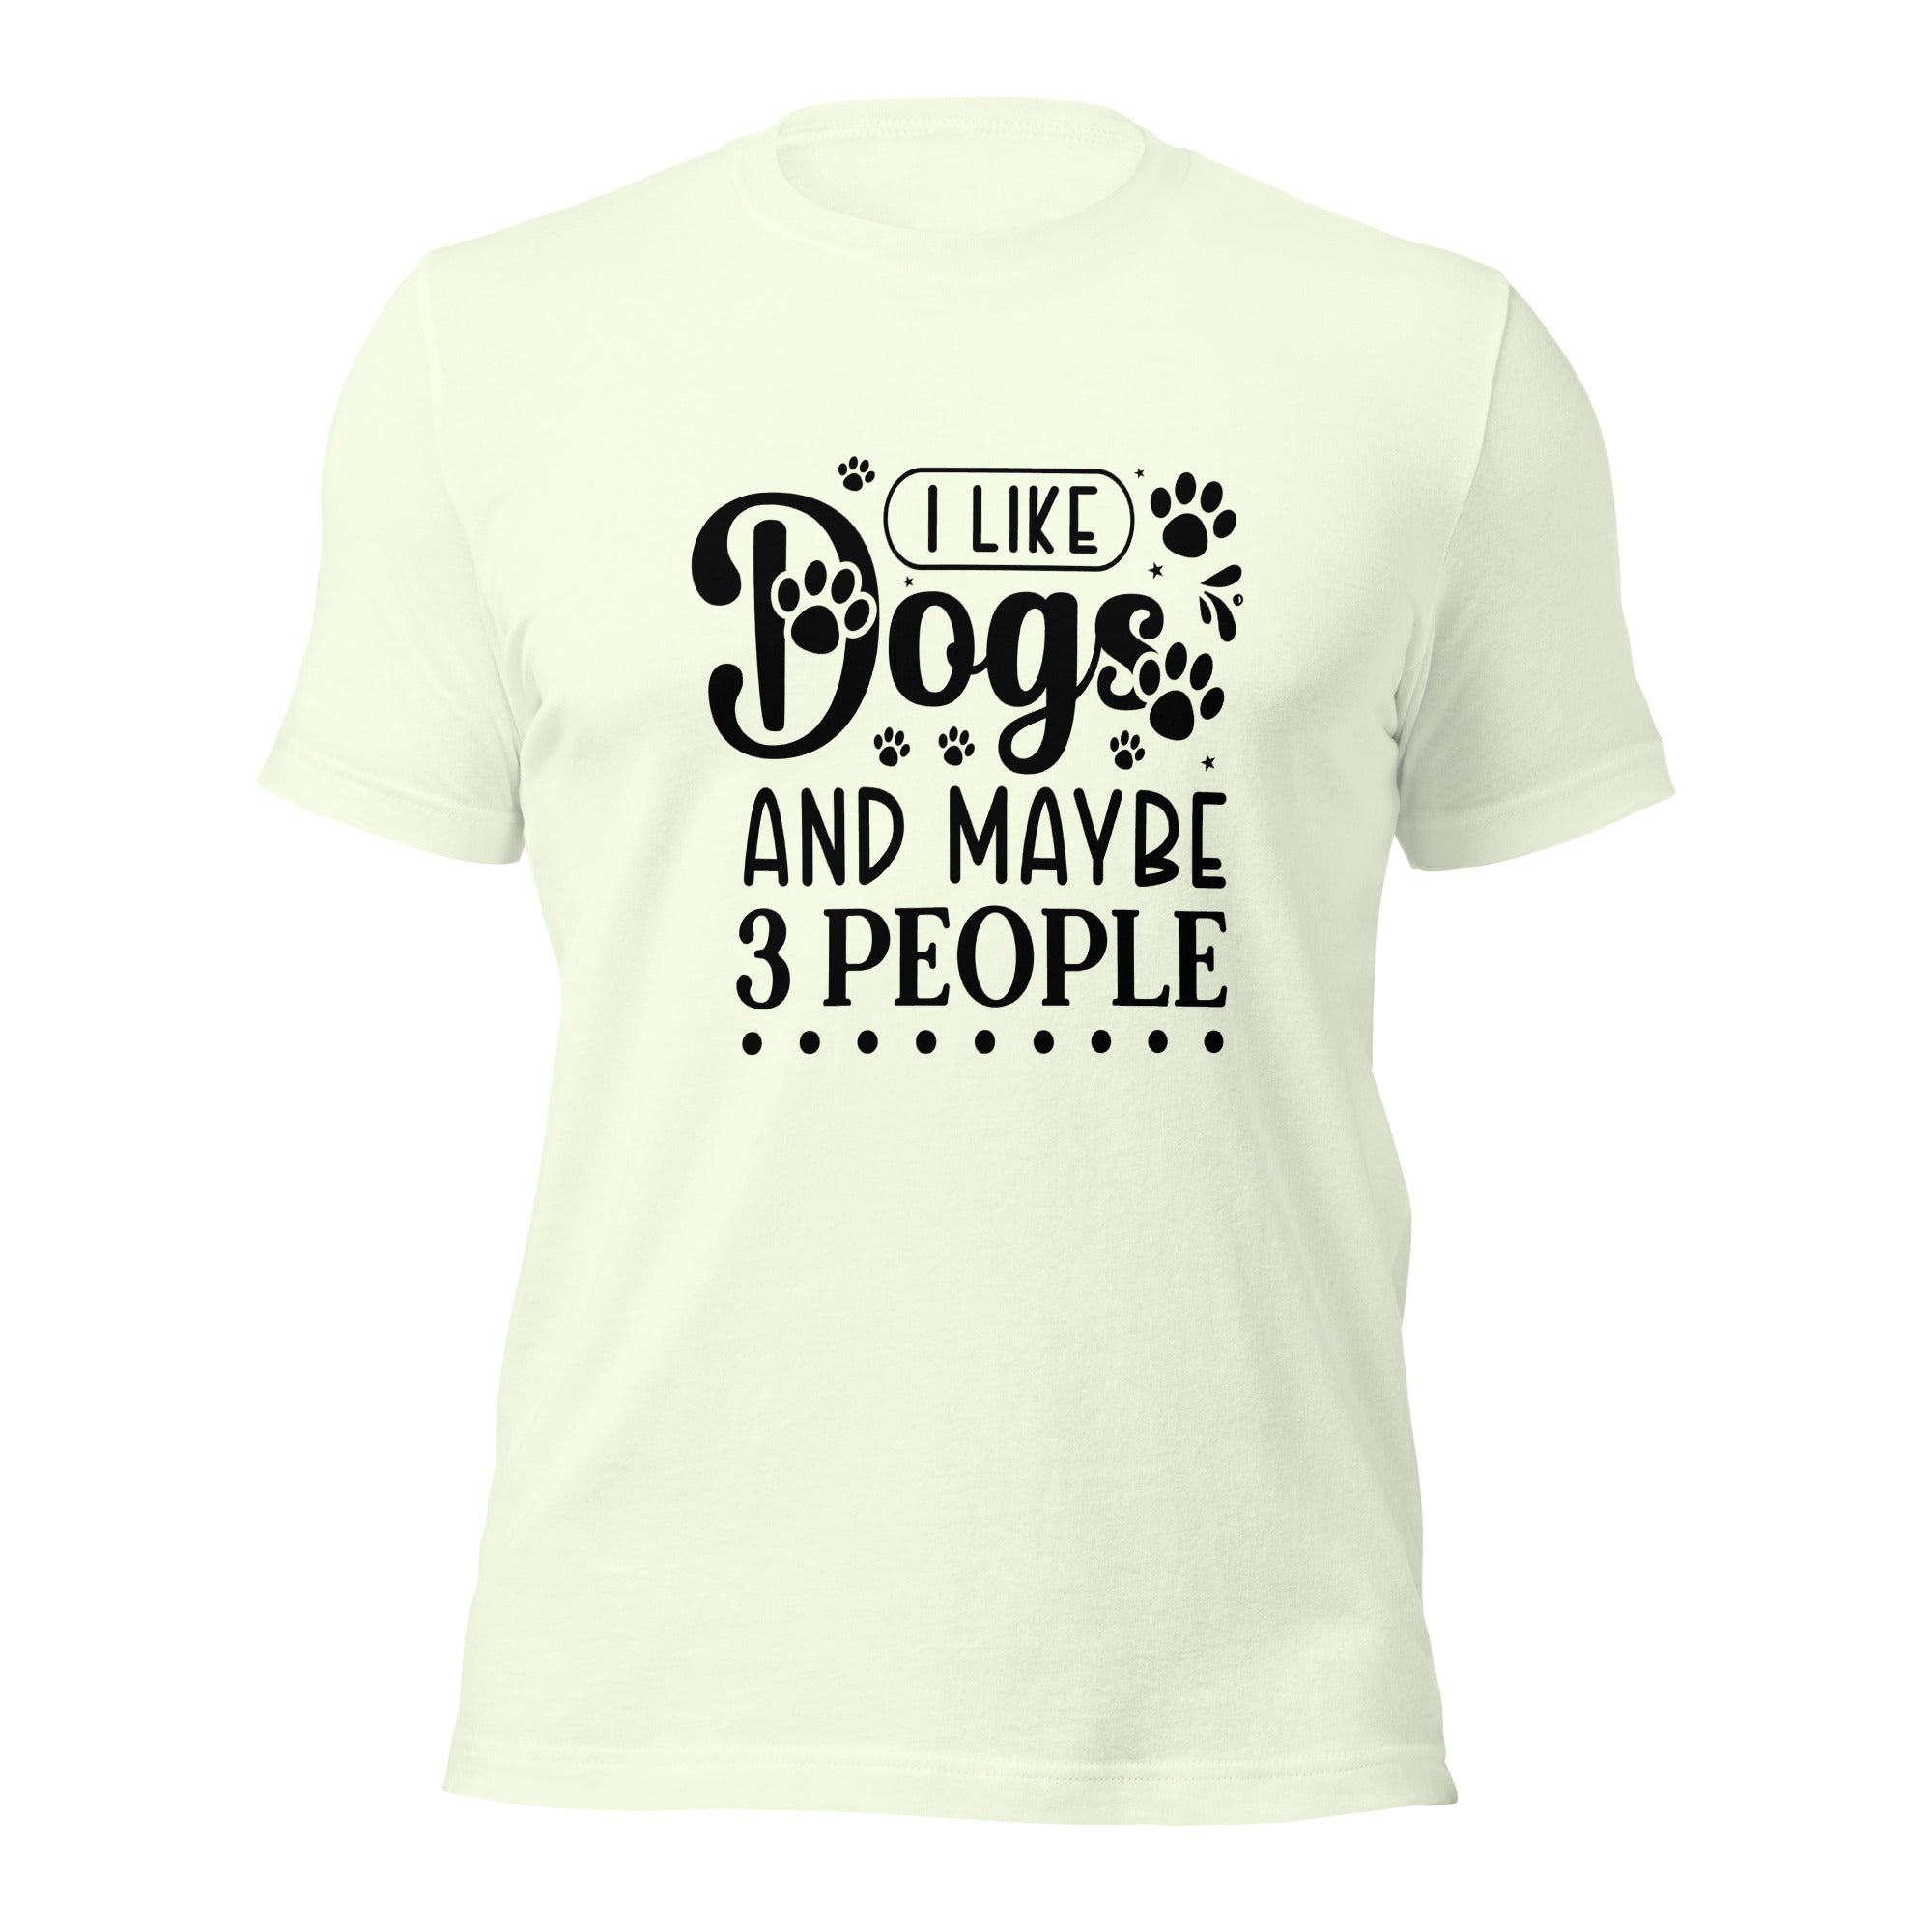 Unisex t-shirt- I Like Dogs And Maybe 3 People